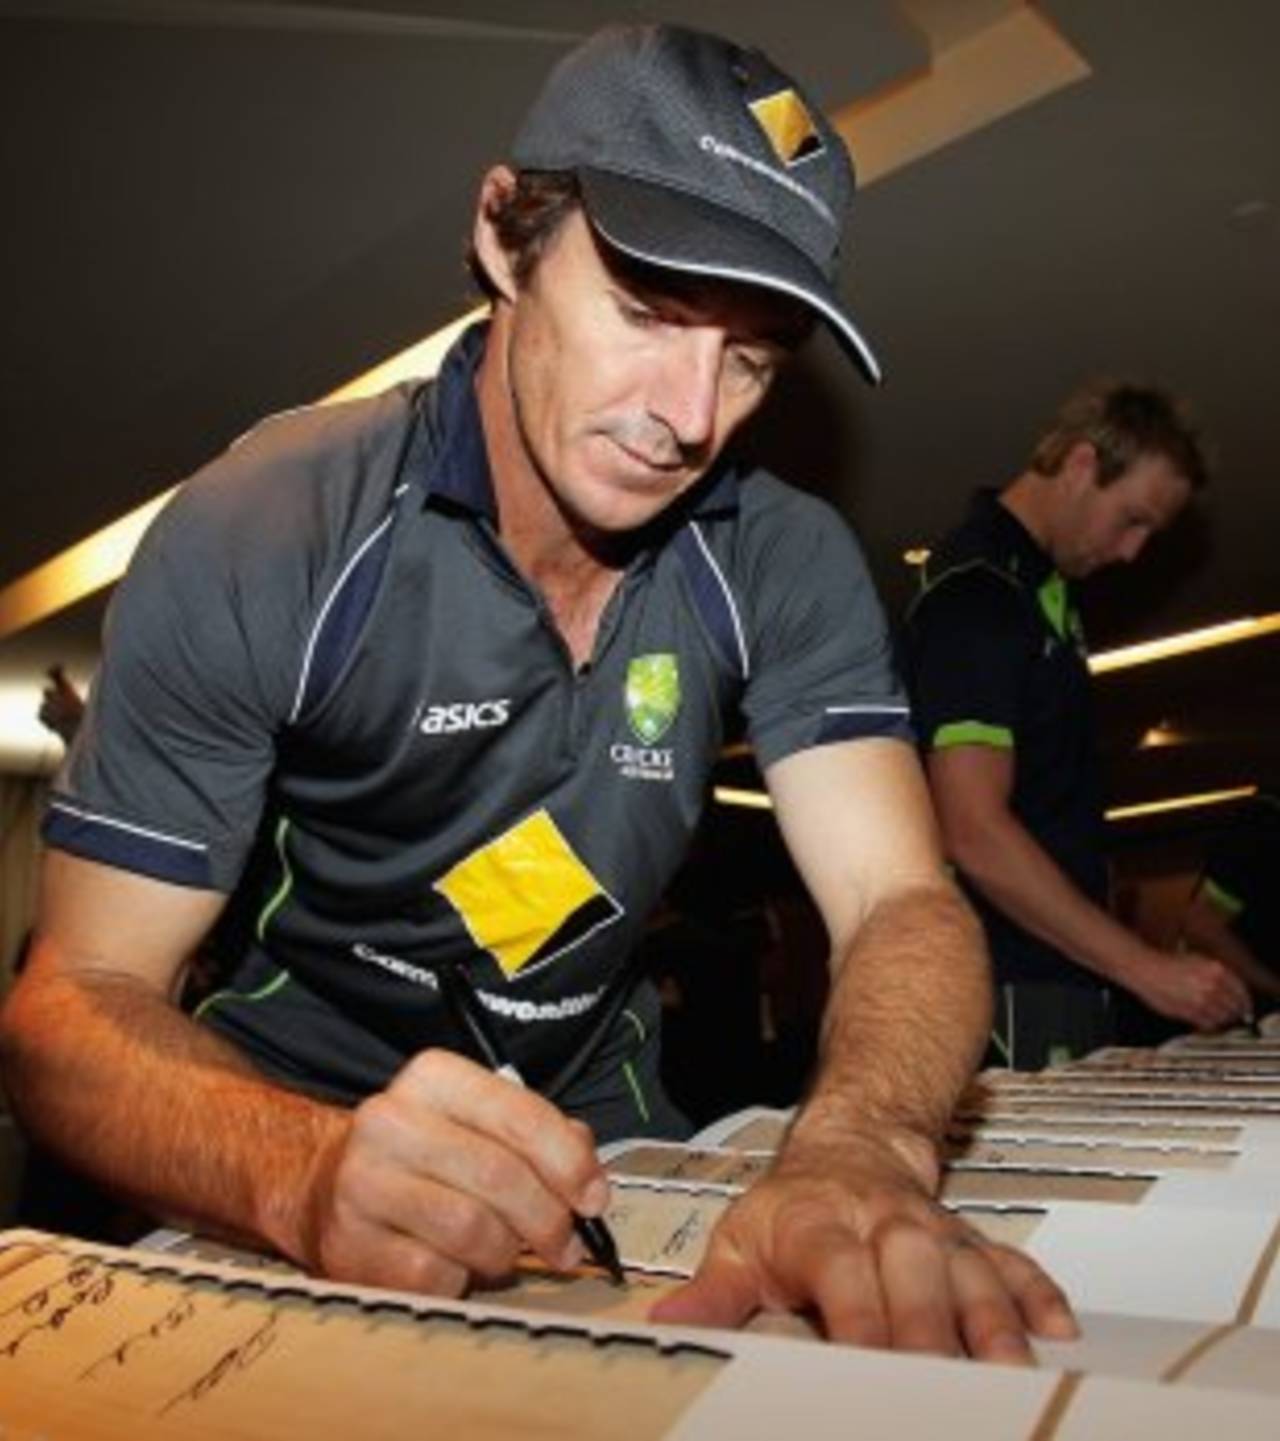 Brad Hogg: "Some of my team-mates are probably old enough to be my sons. But it only took two minutes on the team bus for me to feel part of it again."&nbsp;&nbsp;&bull;&nbsp;&nbsp;ICC